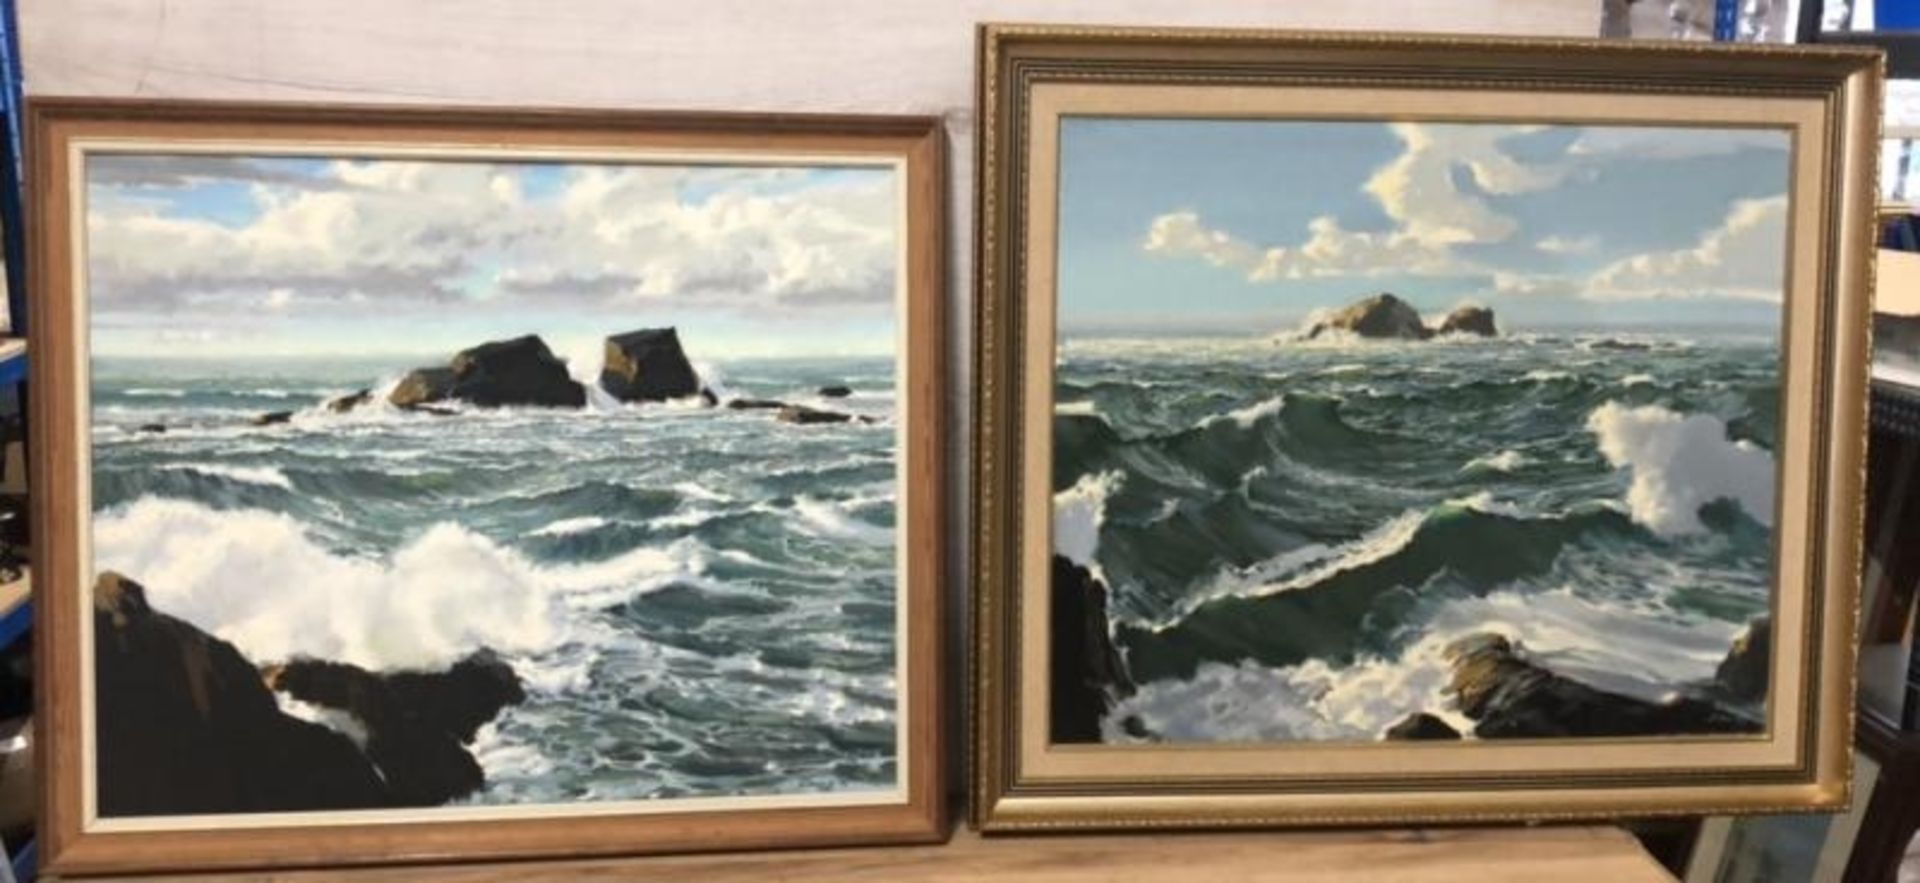 Two original seascapes featuring crashing waves on rocks, oil on canvas 60 x 50cm & 59 x 49cm,